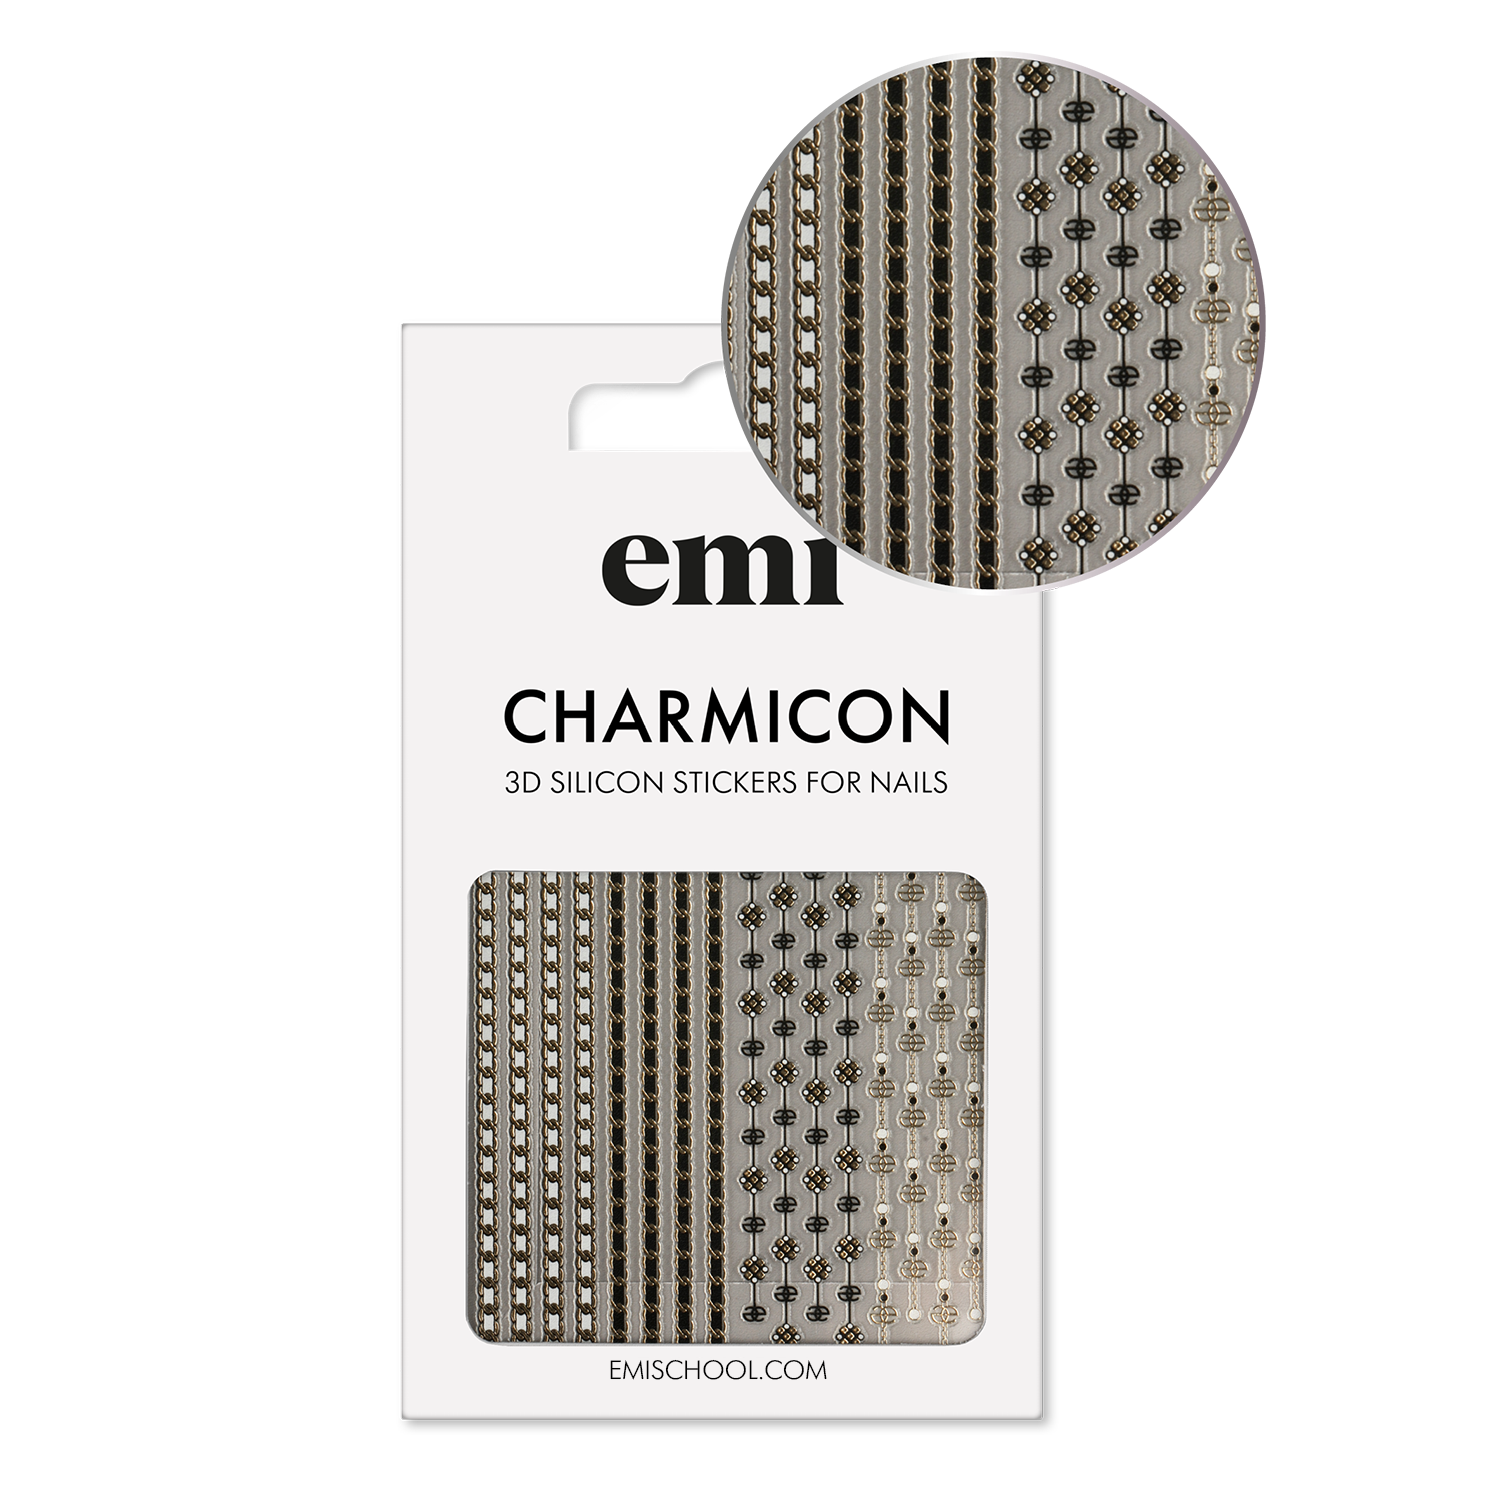 Charmicon 3D Silicone Stickers #236 Fashion chains
Supporting